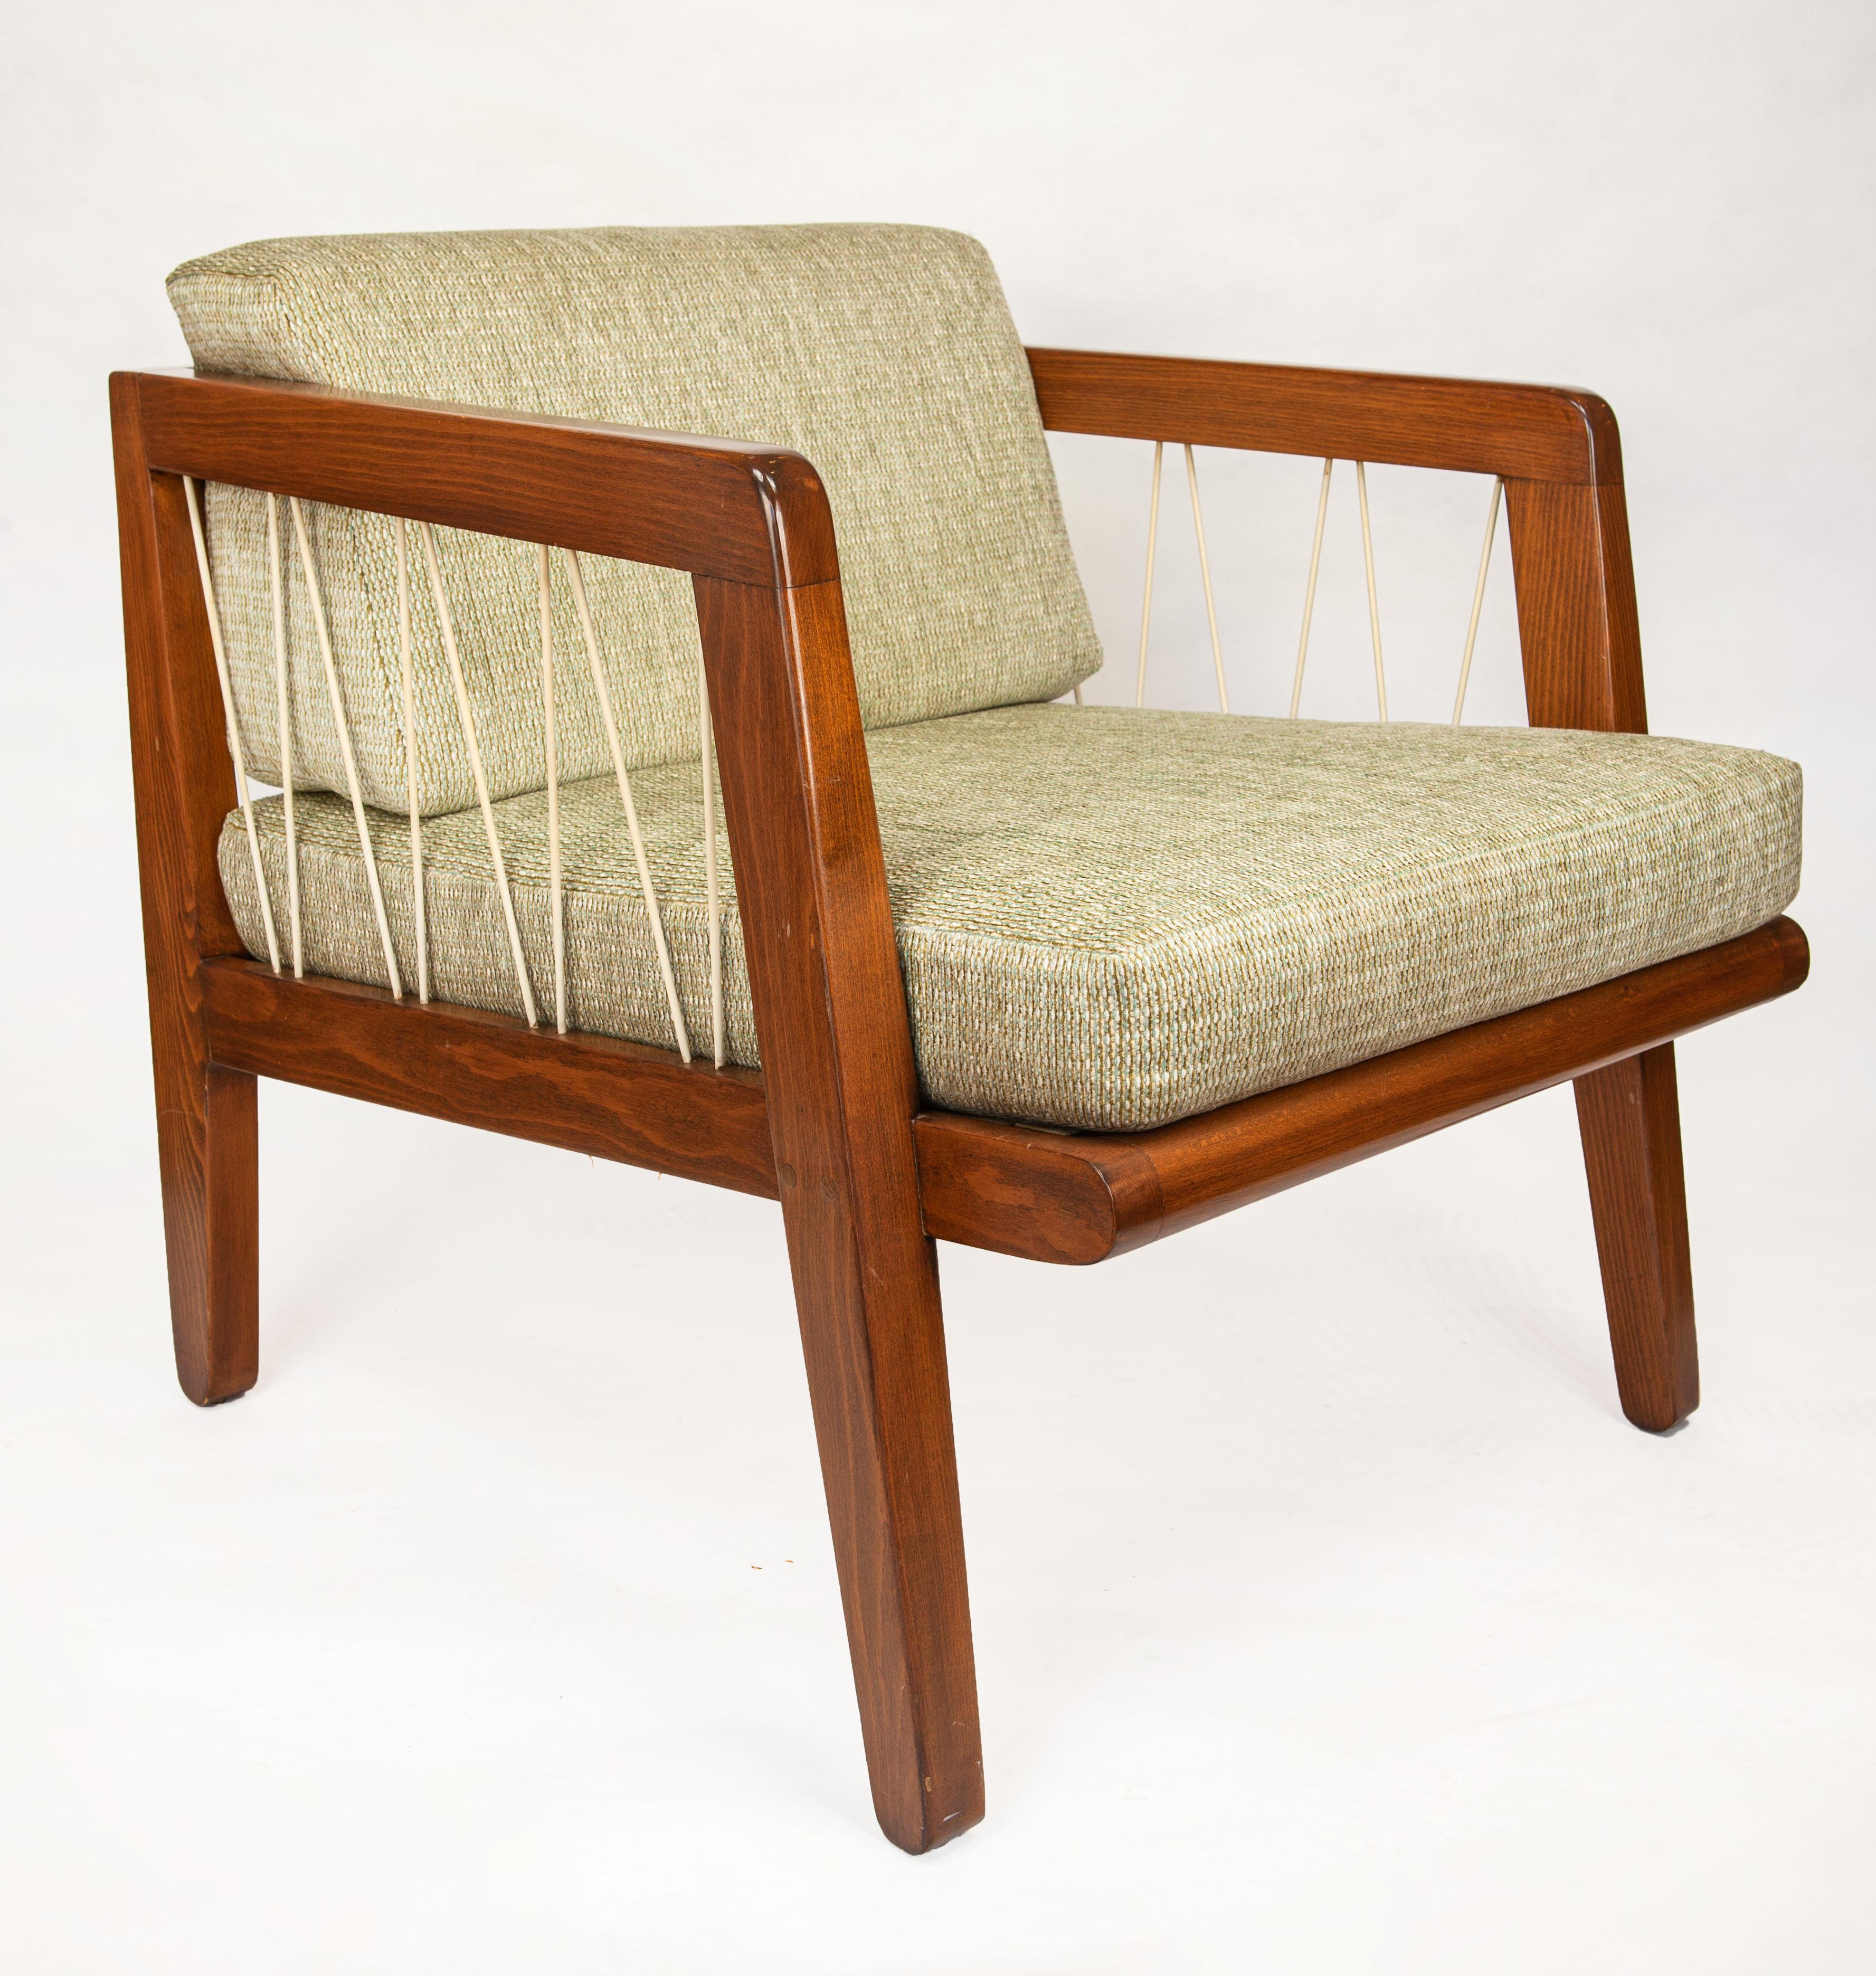 This pair of Mid Century​ Edward Wormley for Drexel 'Precedent Collection' lounge chairs are the perfect interpretation of modern design, while preserving cherished elements from the past. These low slung framed chairs feature a distinct zig-zag